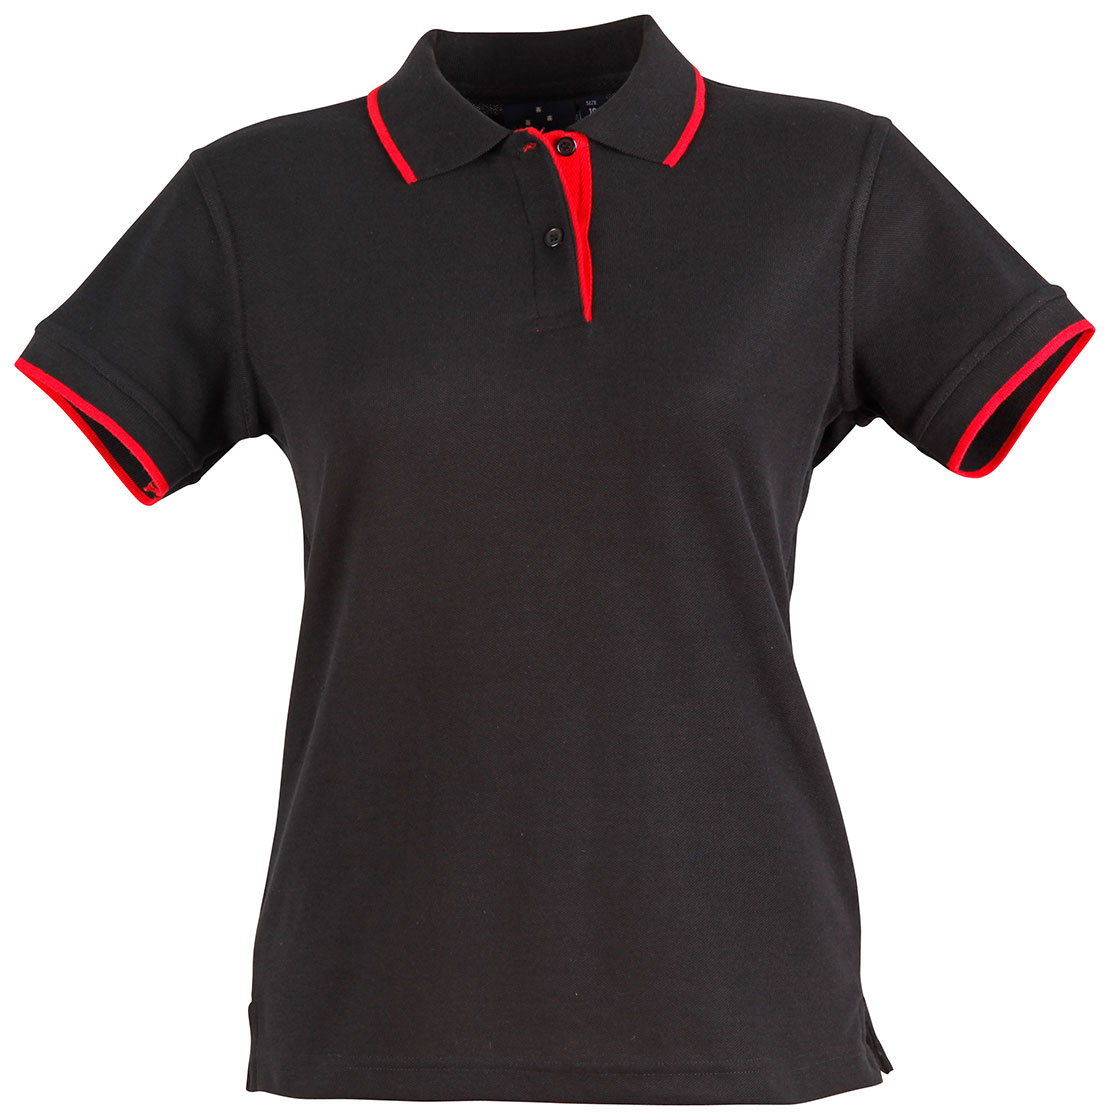 PS48A Ladies’ Poly/Cotton Contrast Pique Short Sleeve Polo